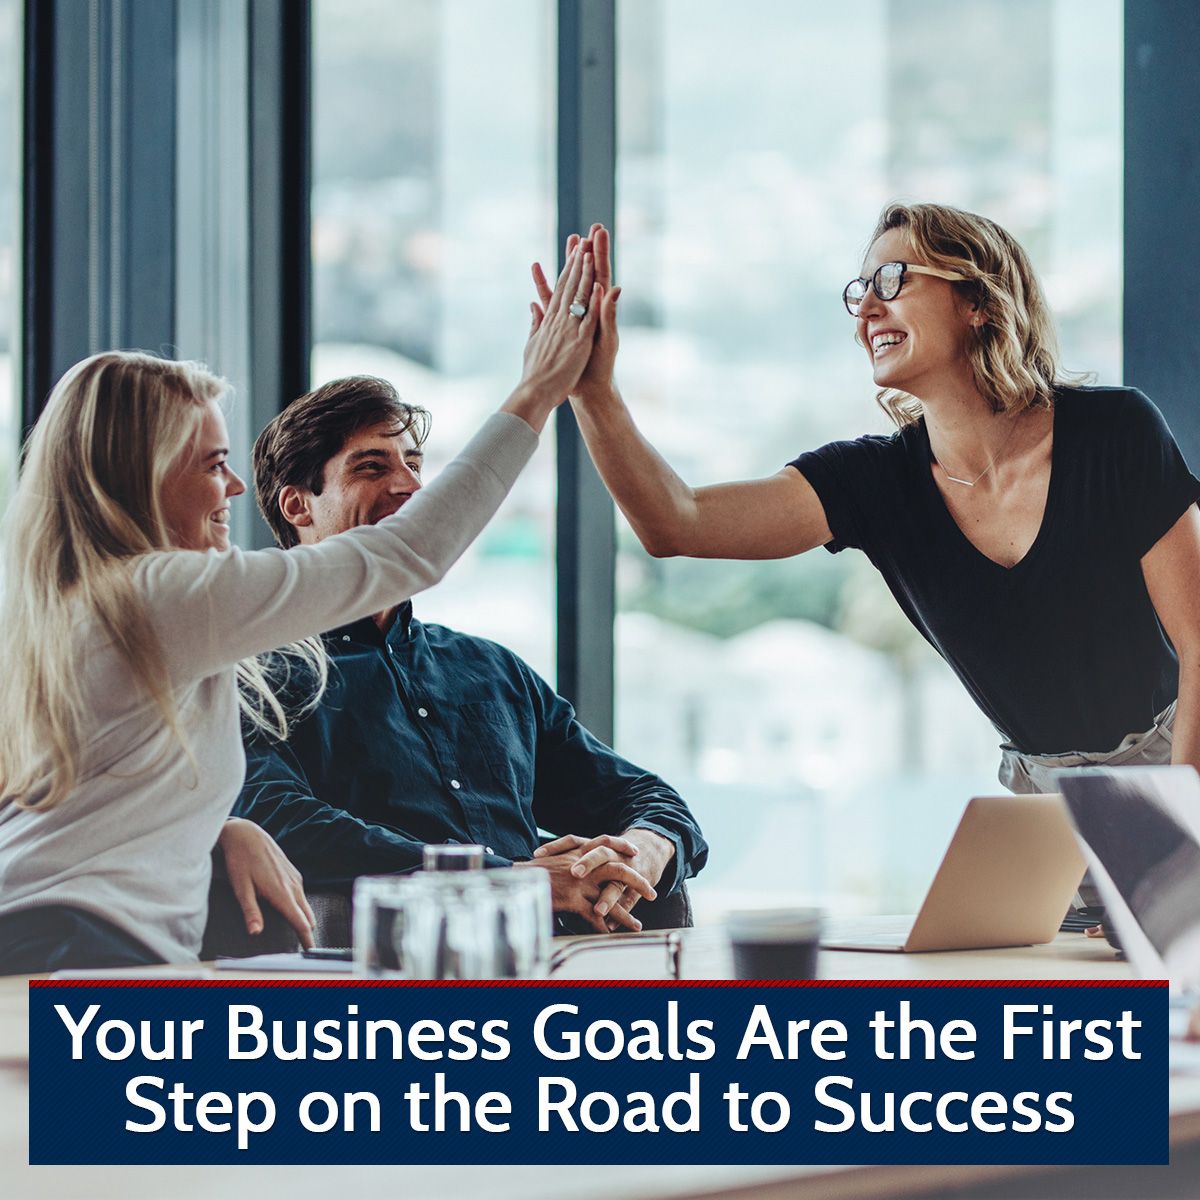 Your Business Goals Are the First Step on the Road to Success